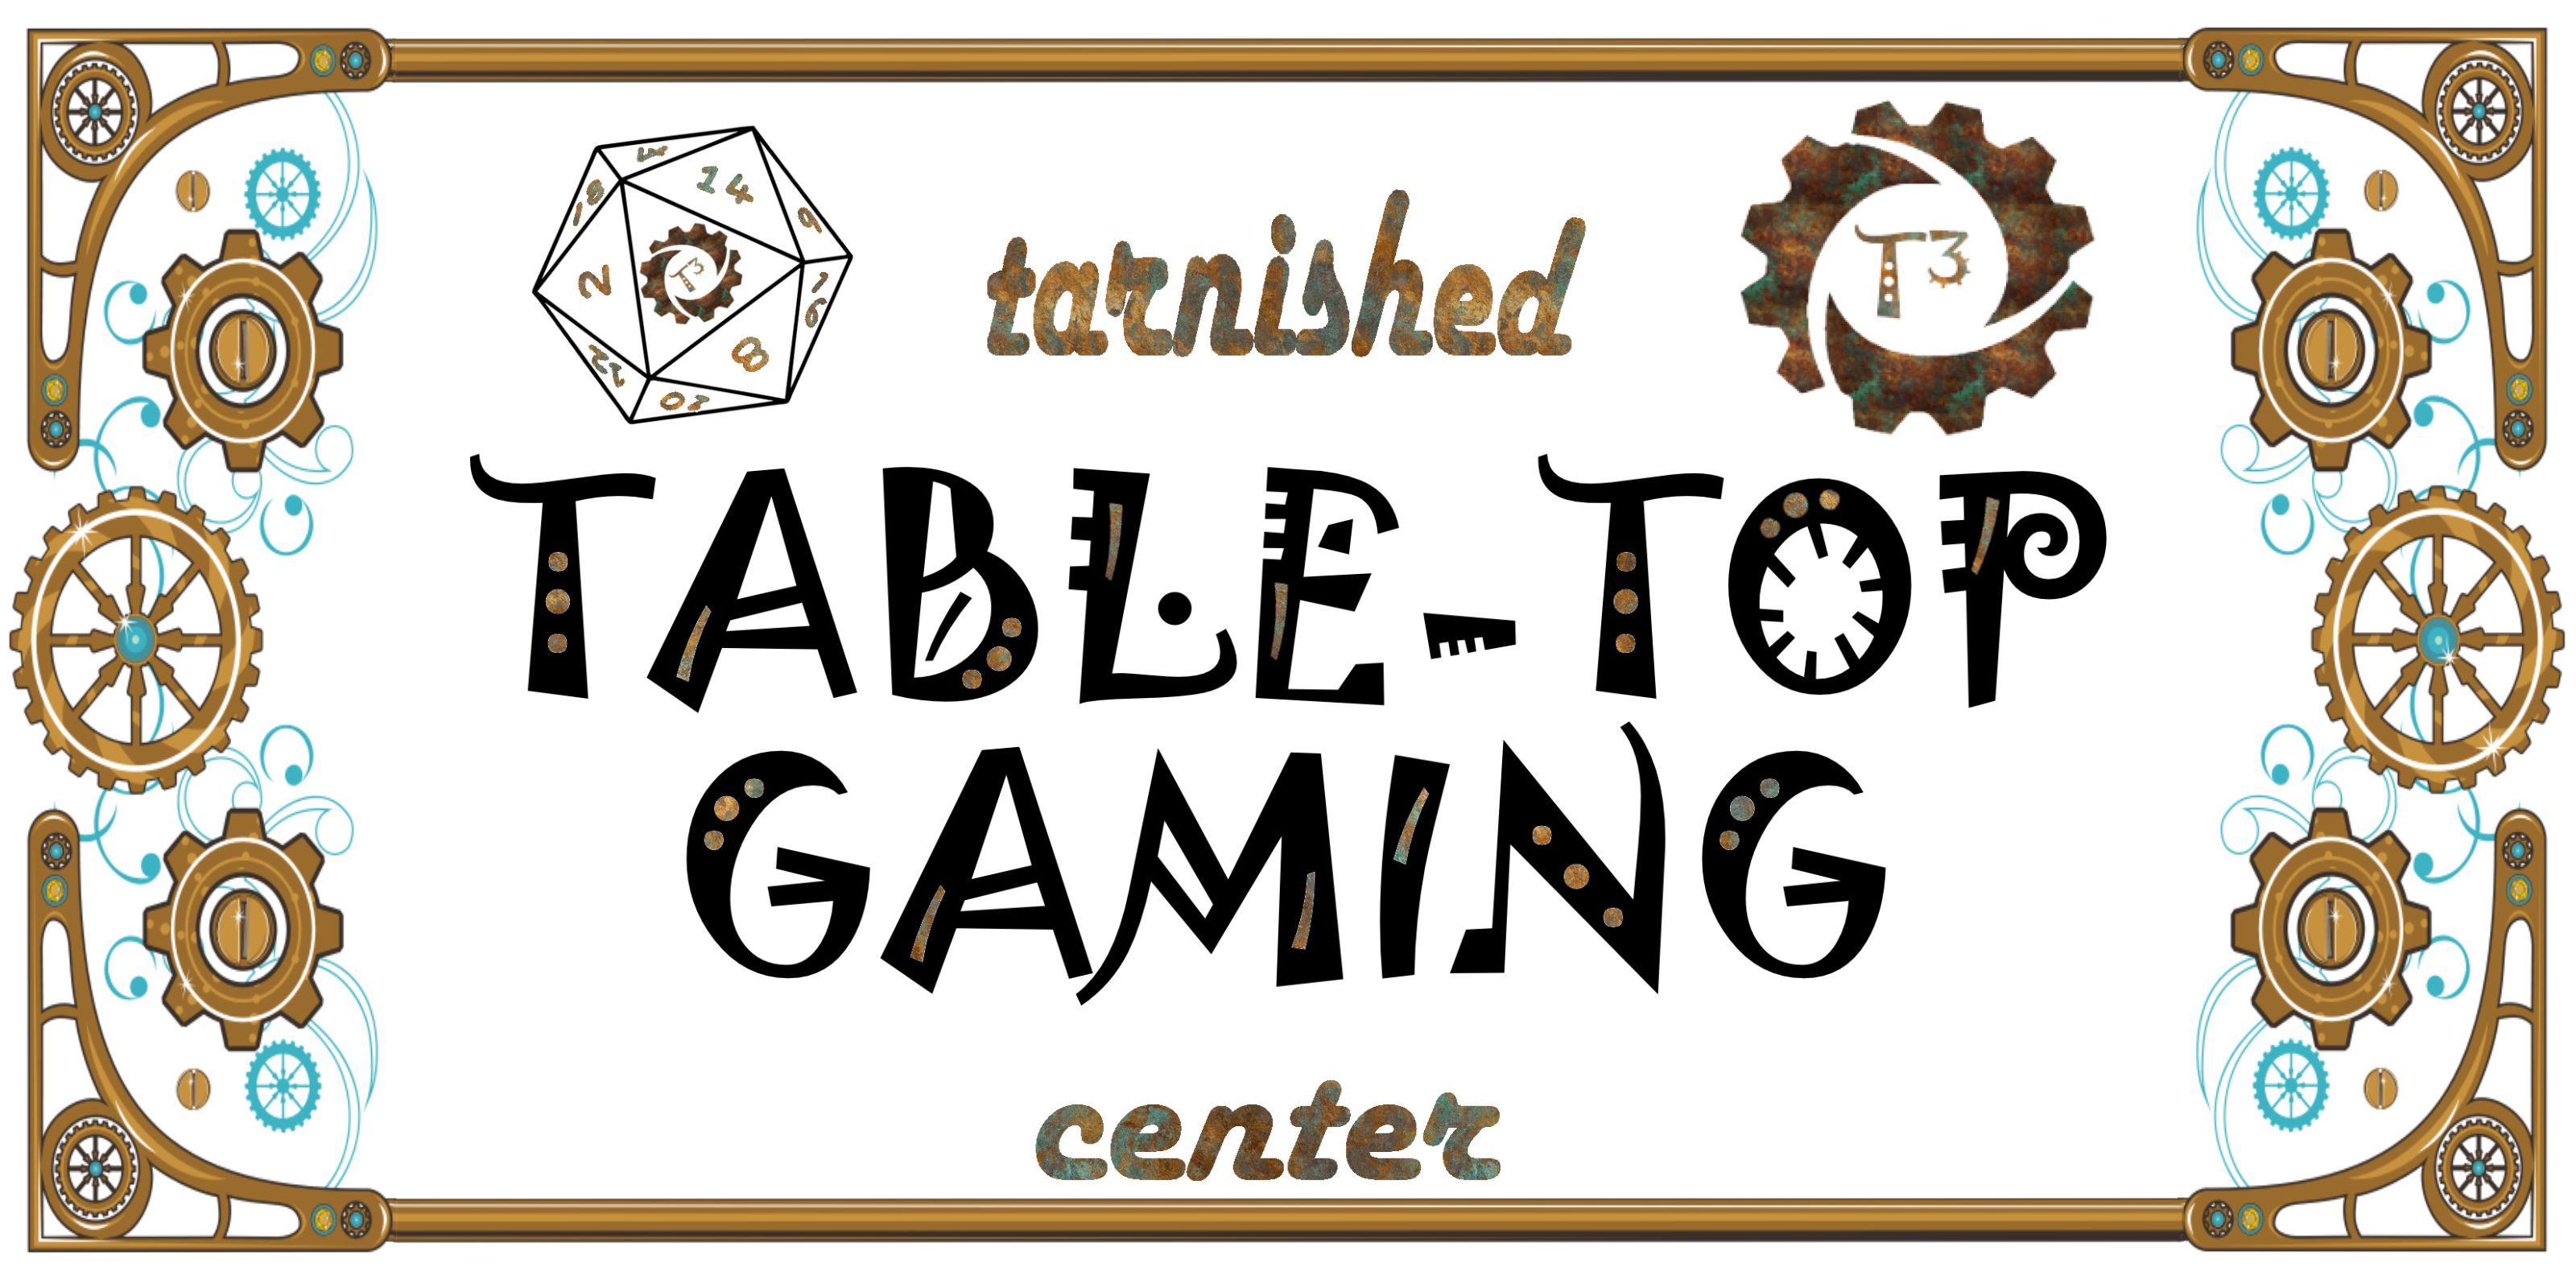 Tarnished Table-Top Gaming Center